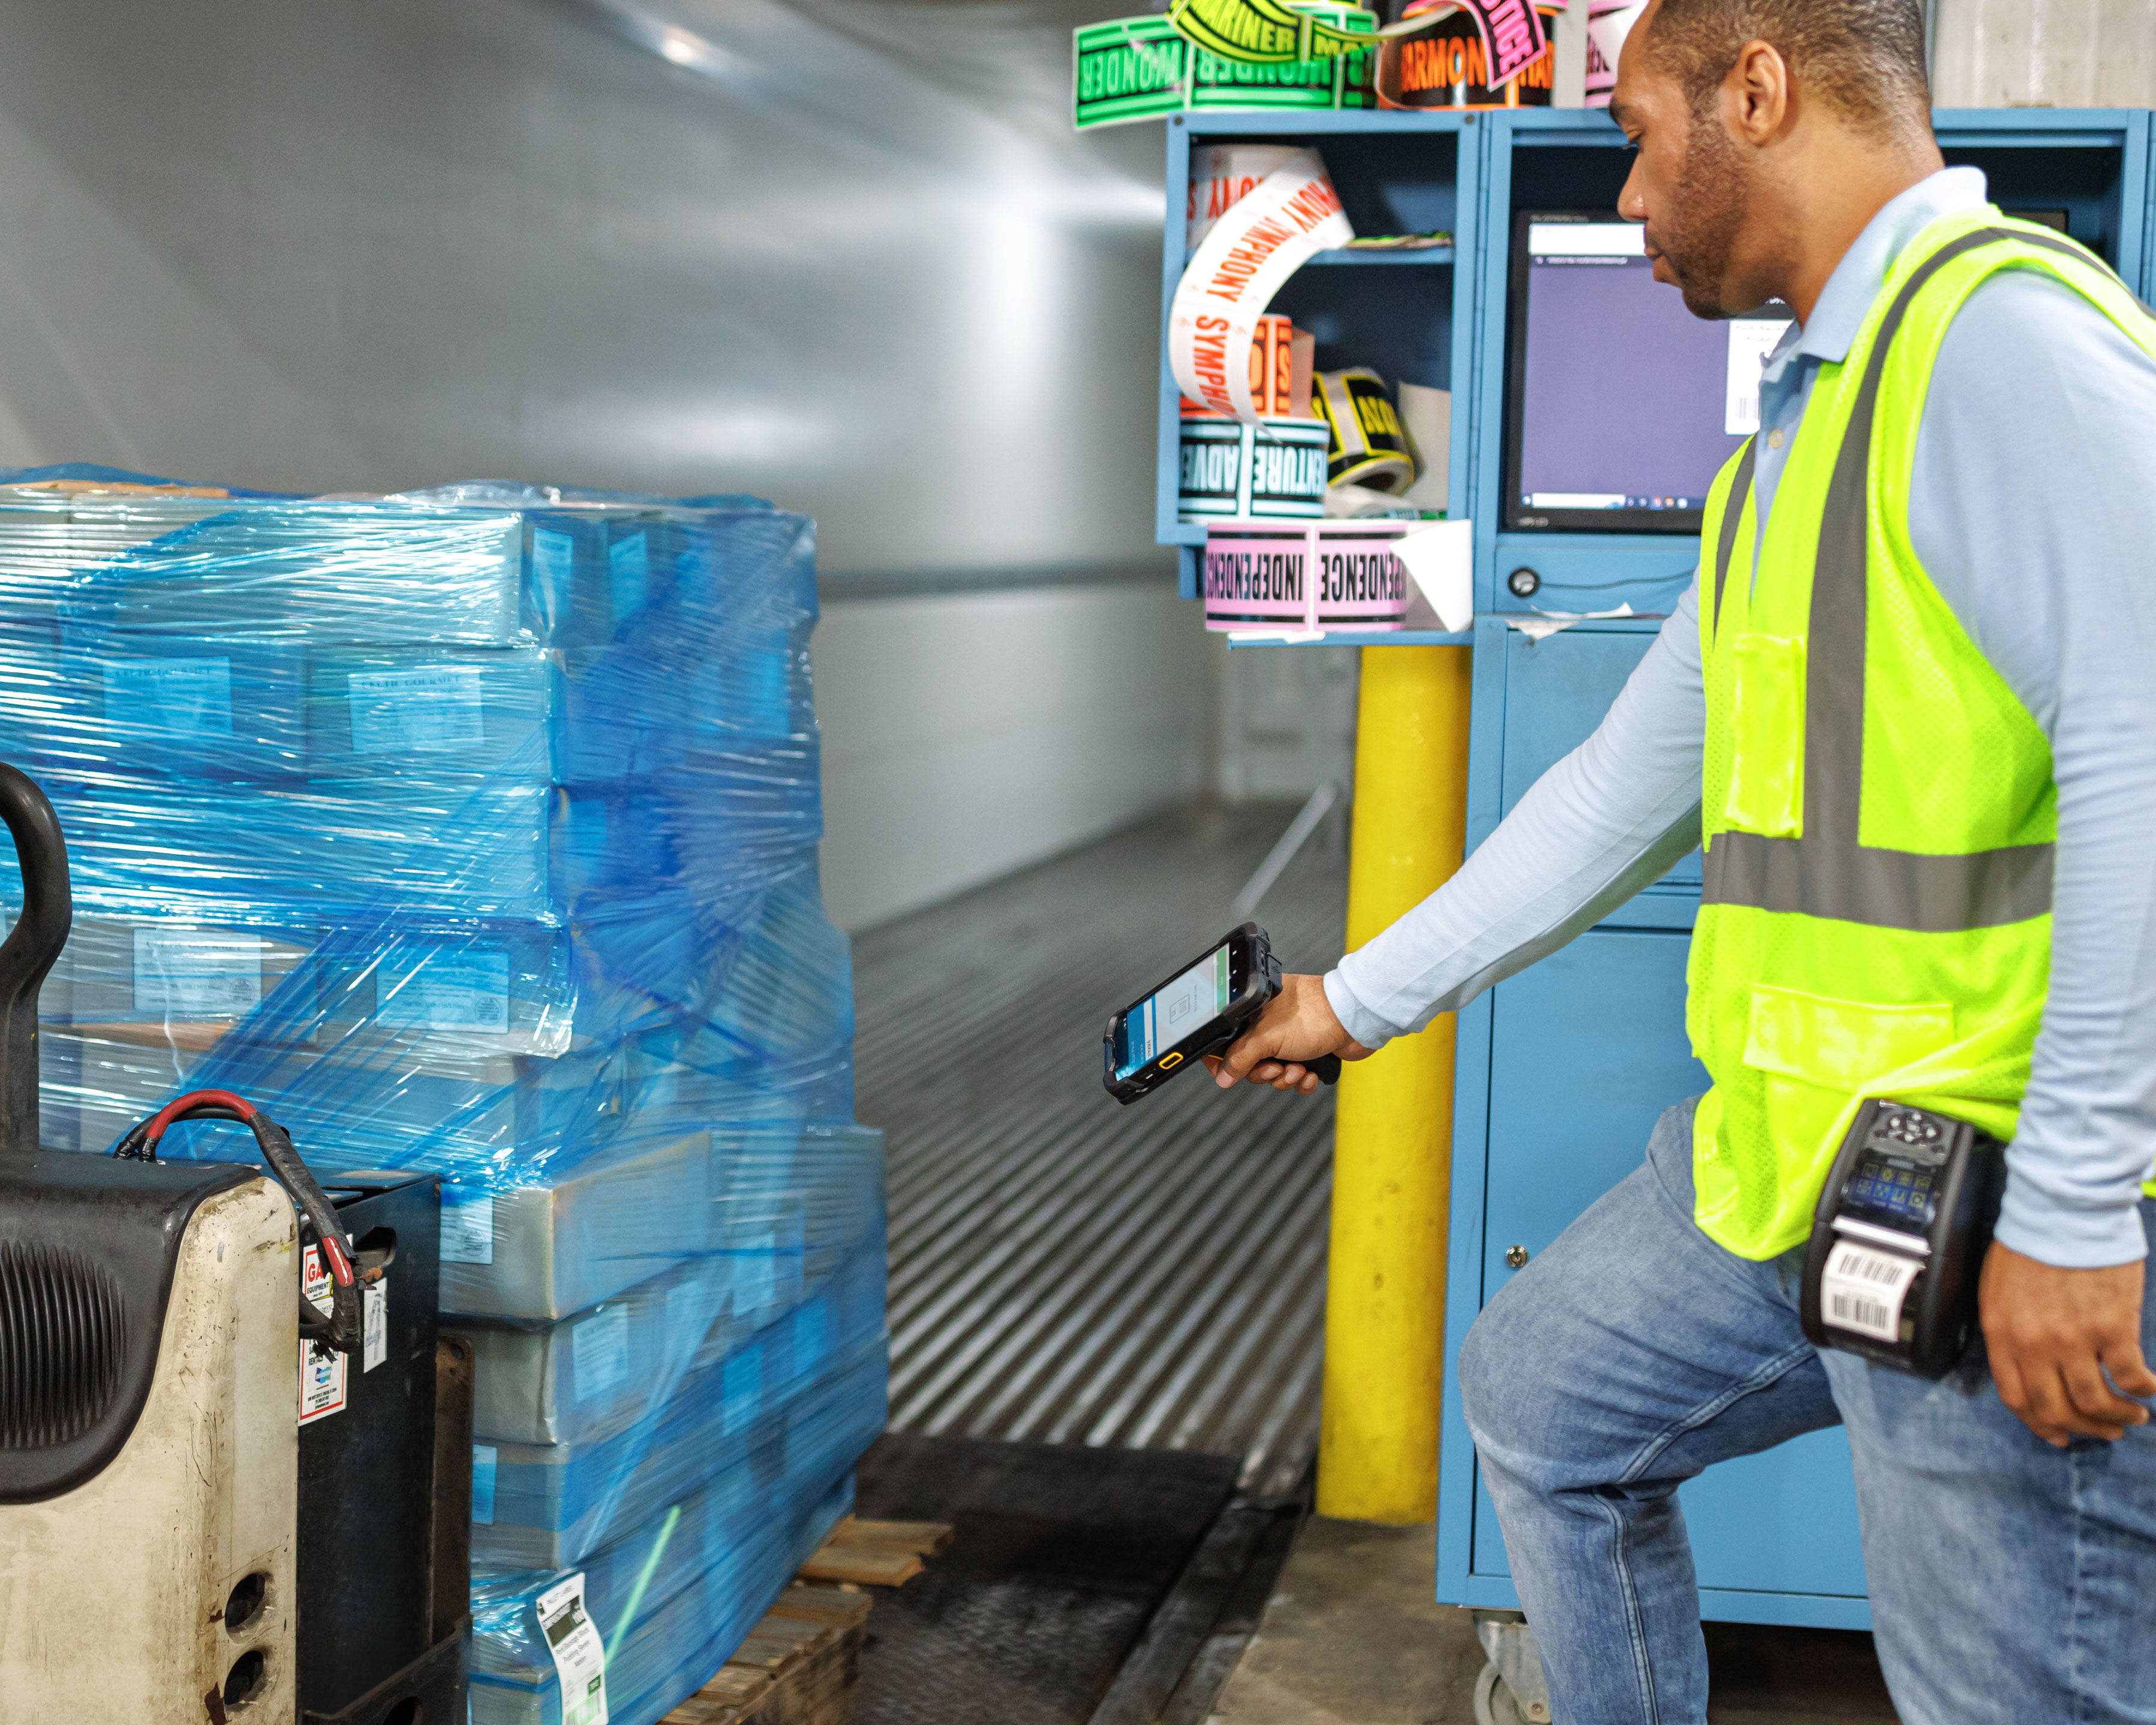 Warehouse worker using a Zebra TC78 handheld computer to scan a pallet